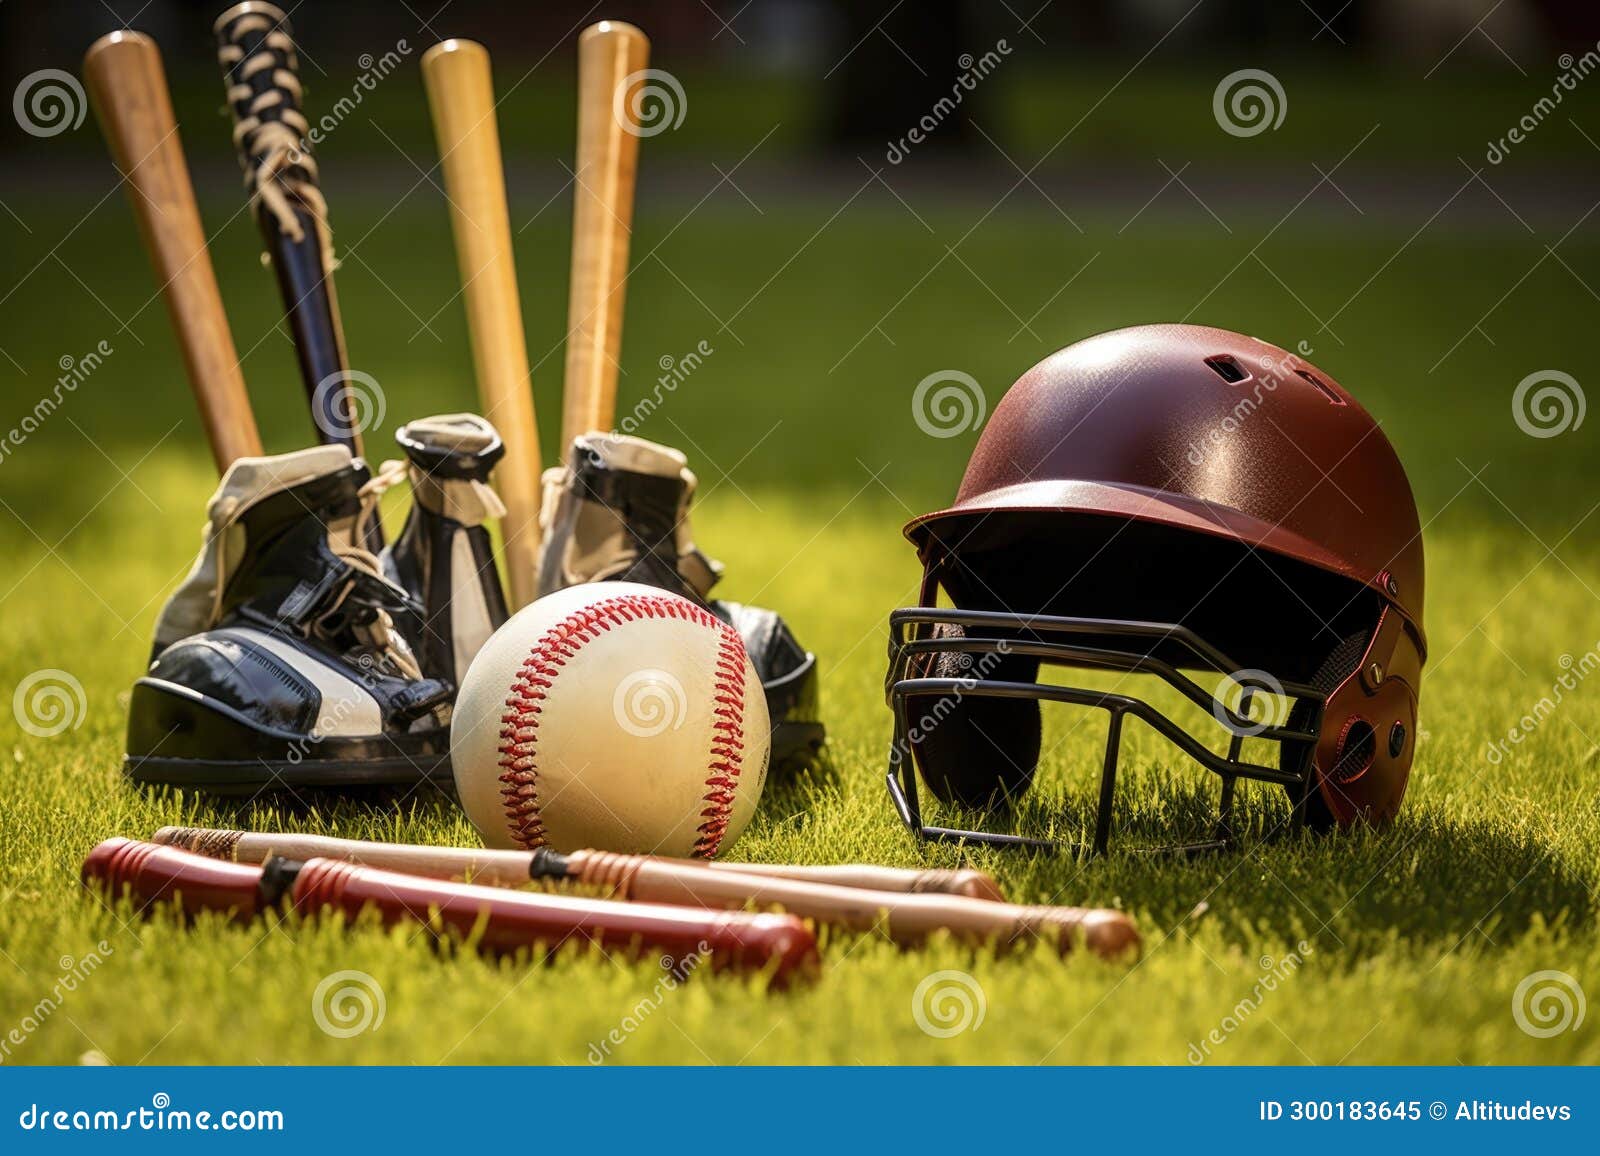 t-ball equipment including helmet, bat, and ball on the grass